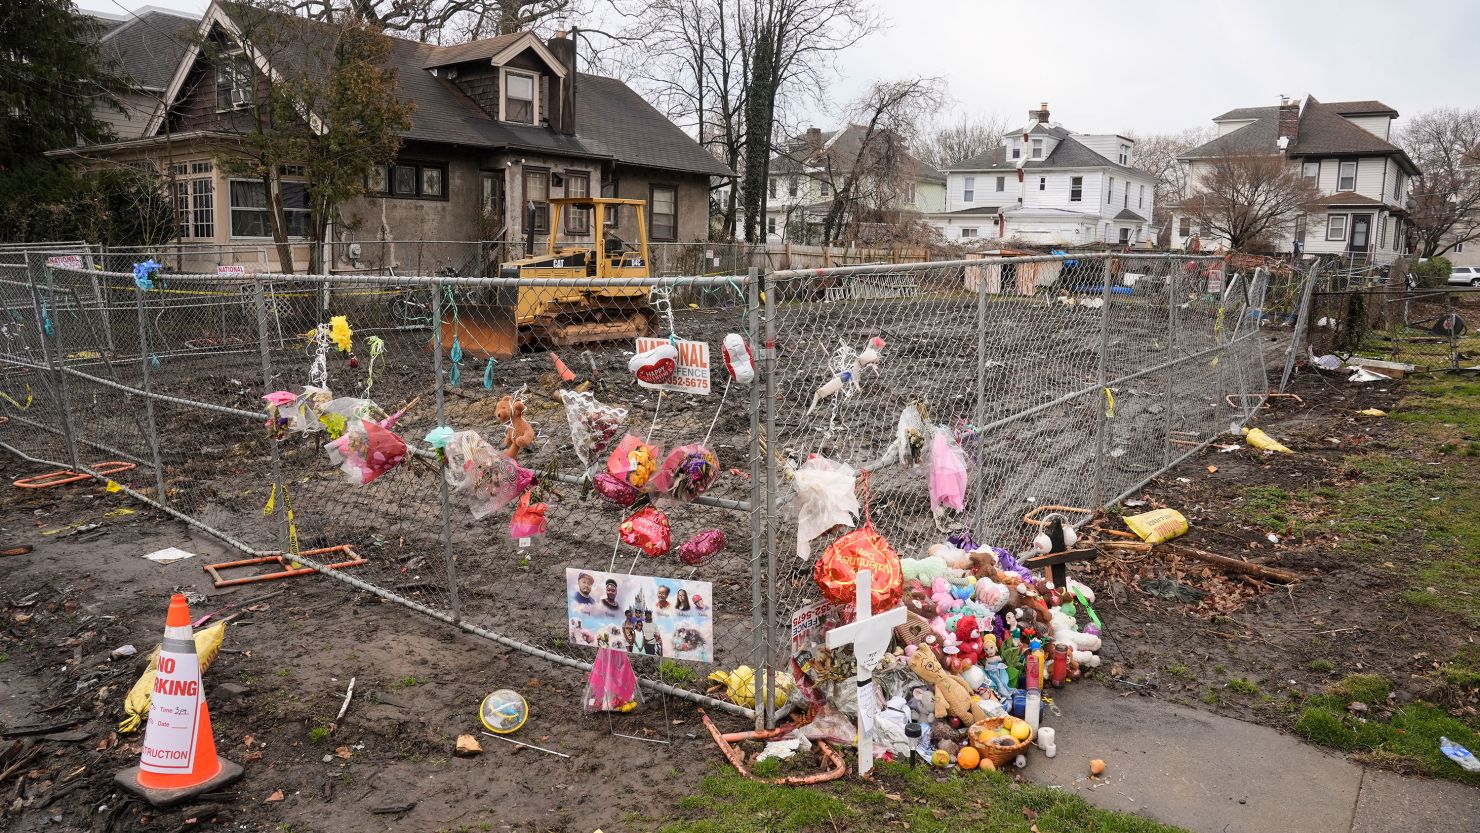 Community members created a makeshift memorial at the scene of a shootout and house fire that killed six members of an extended family in East Lansdowne.